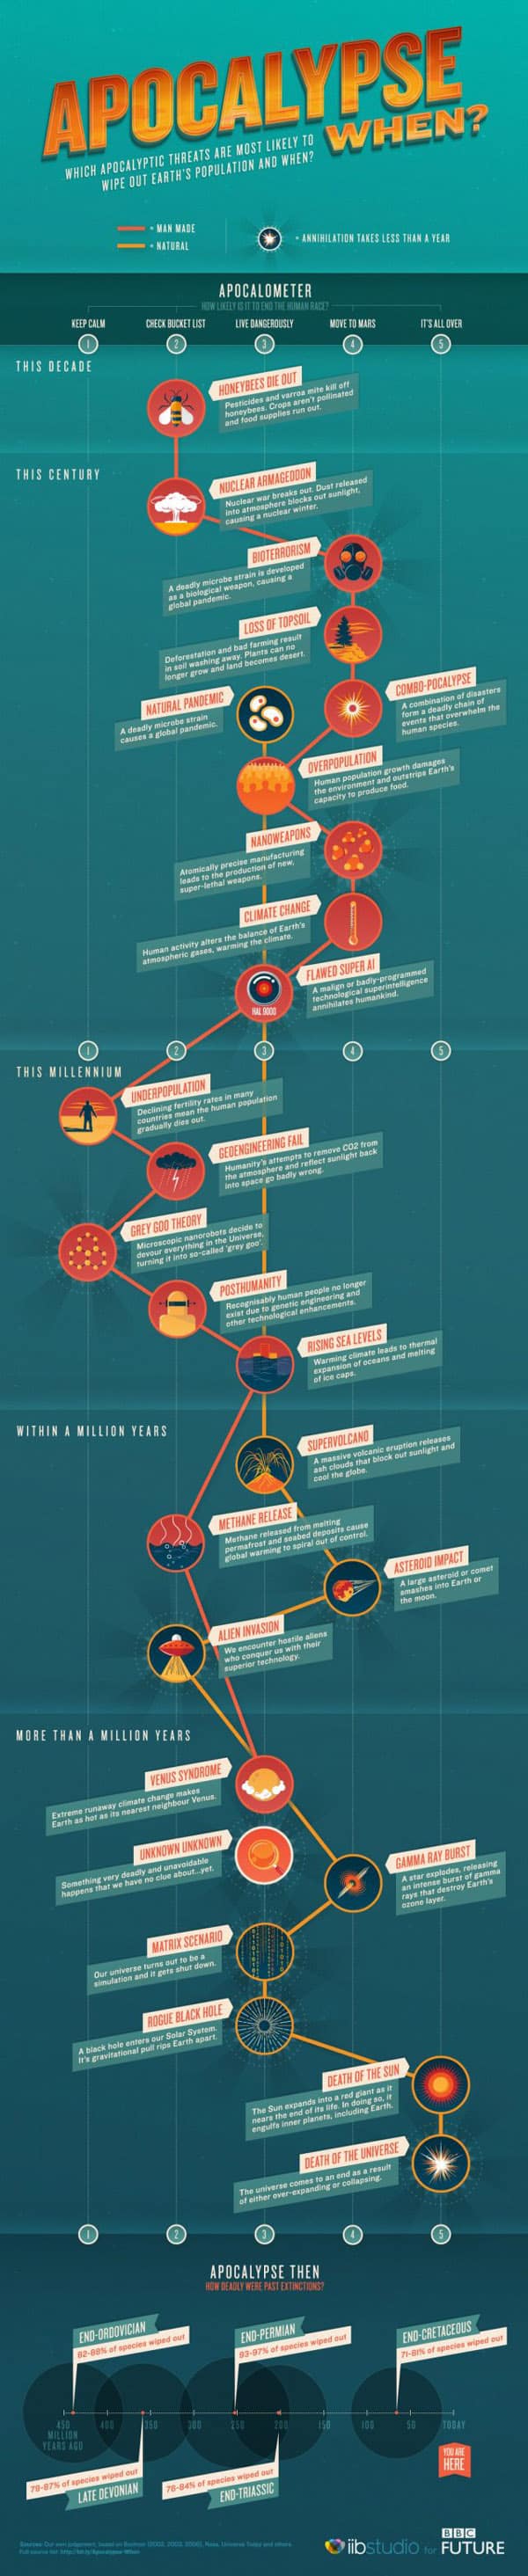 long form infographic goes far down the page